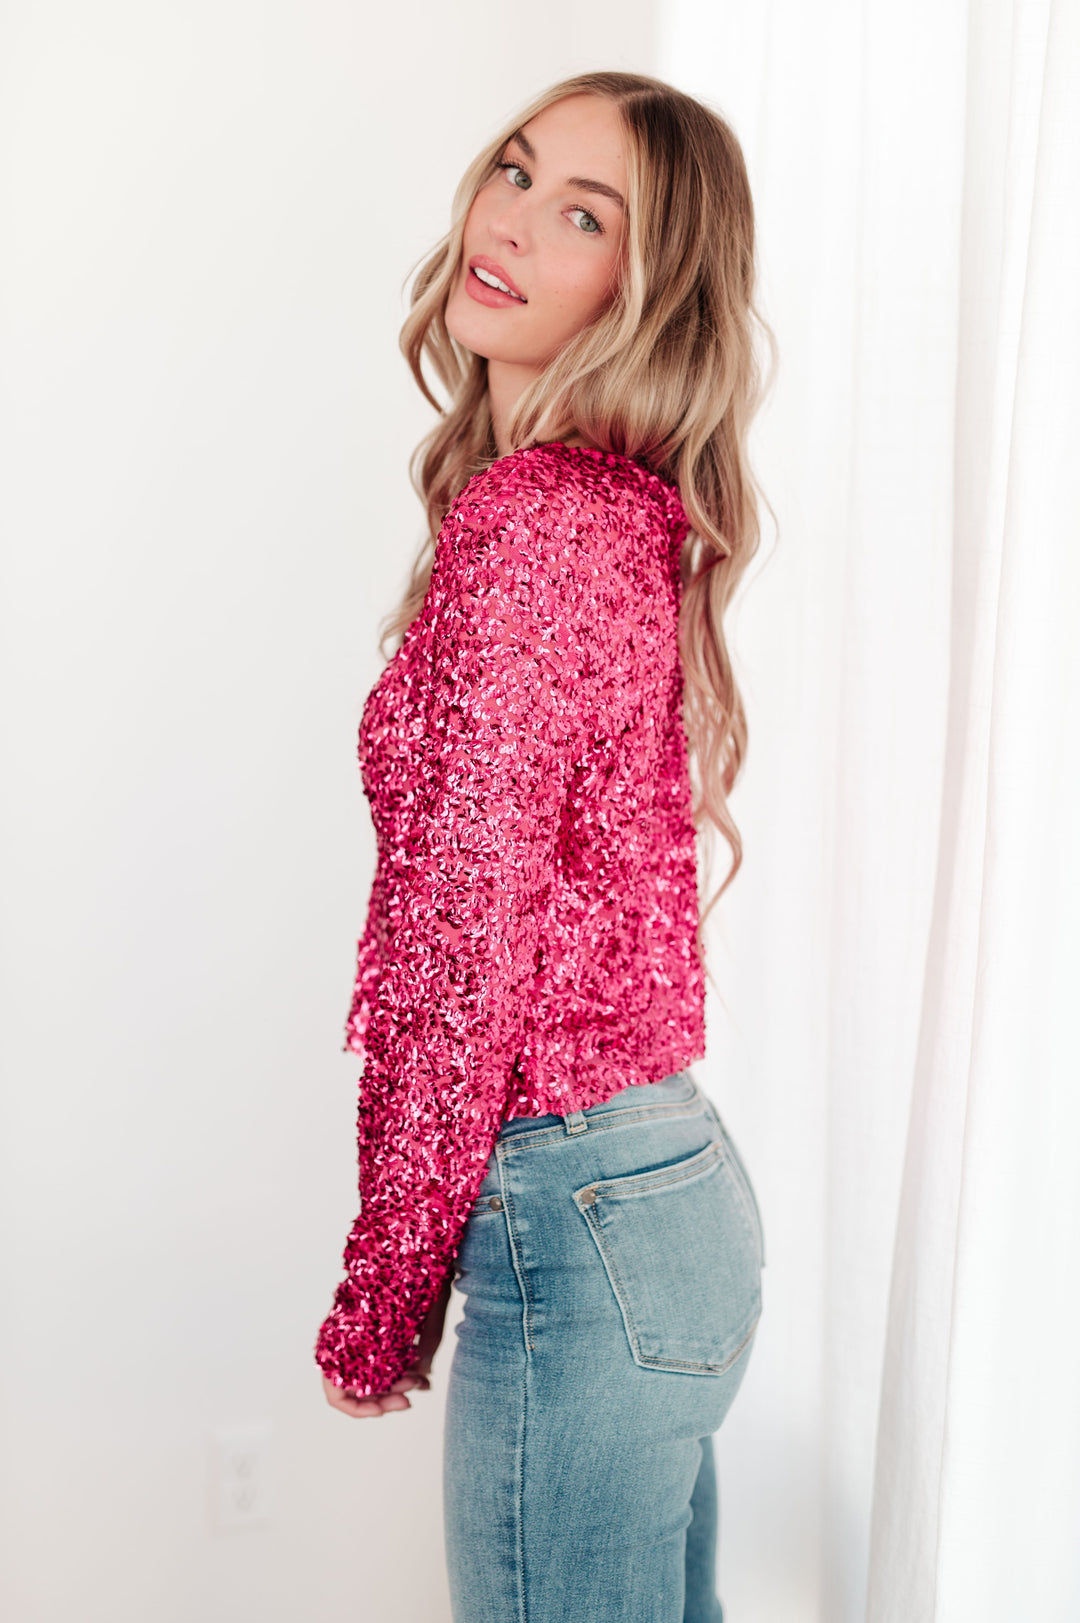 You Found Me Sequin Top in Fuchsia - OW *FINAL SALE*